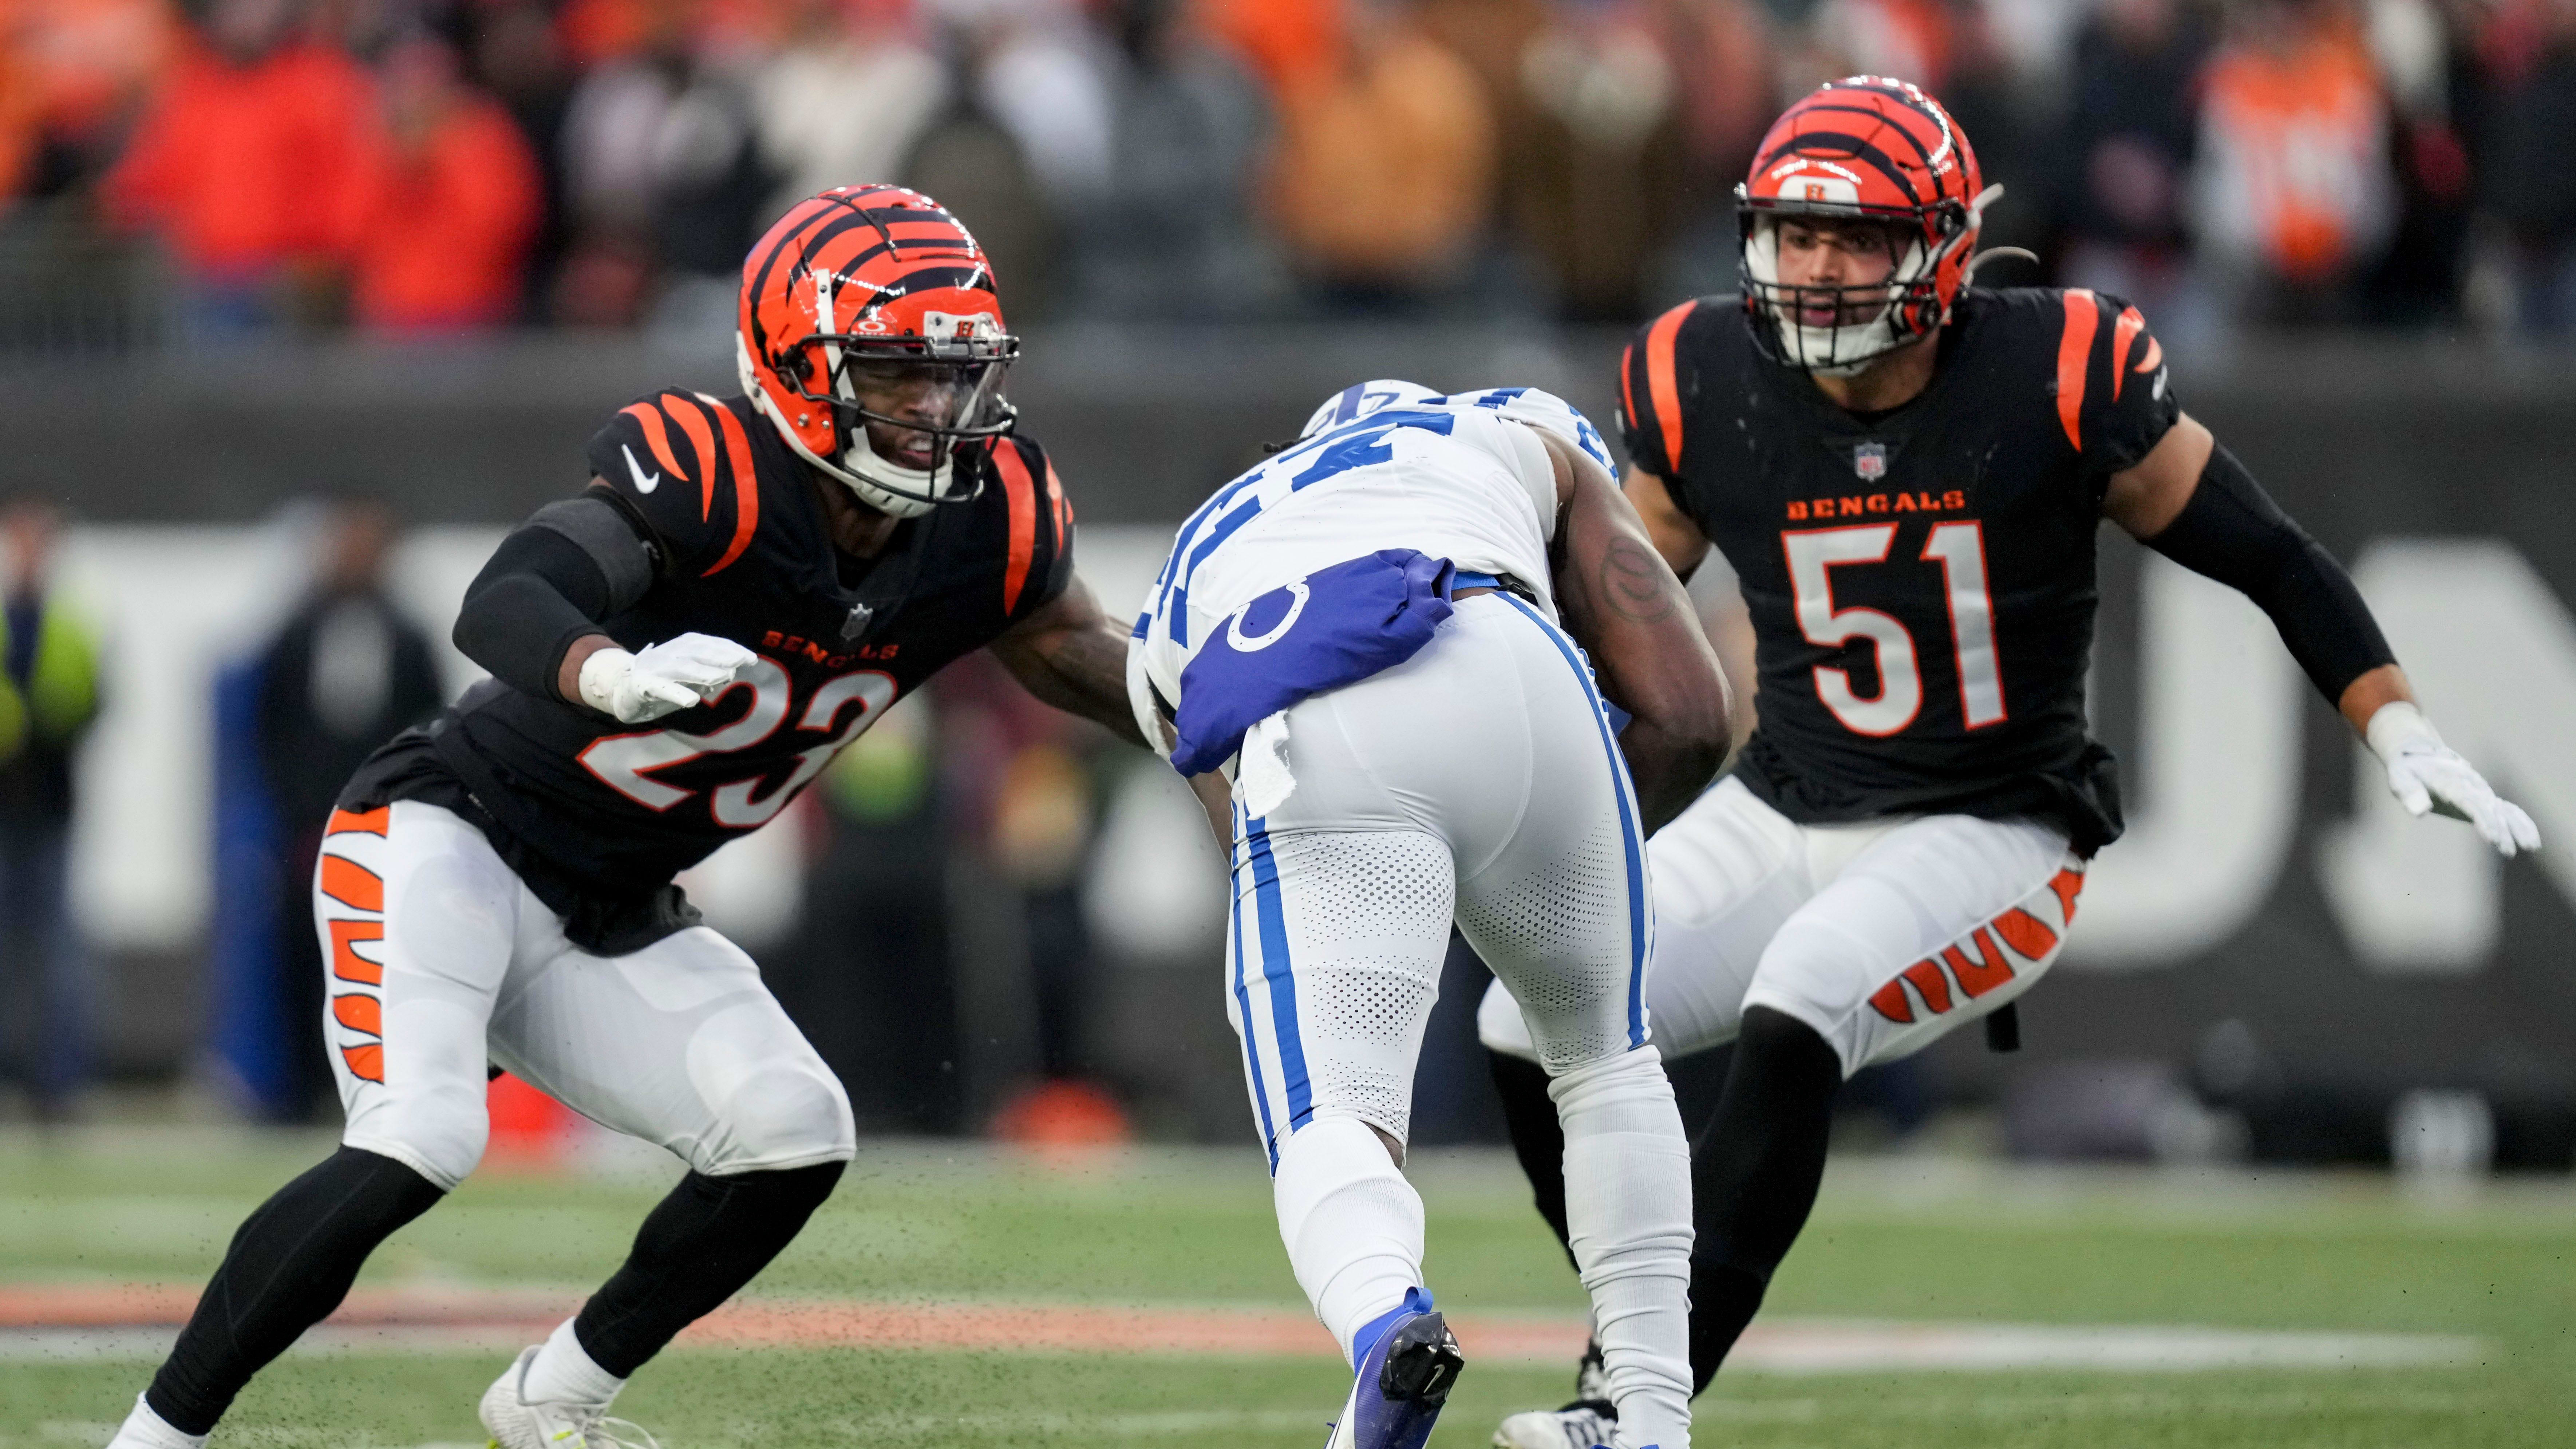 Report: Former Bengals Linebacker Signs With NFC Team